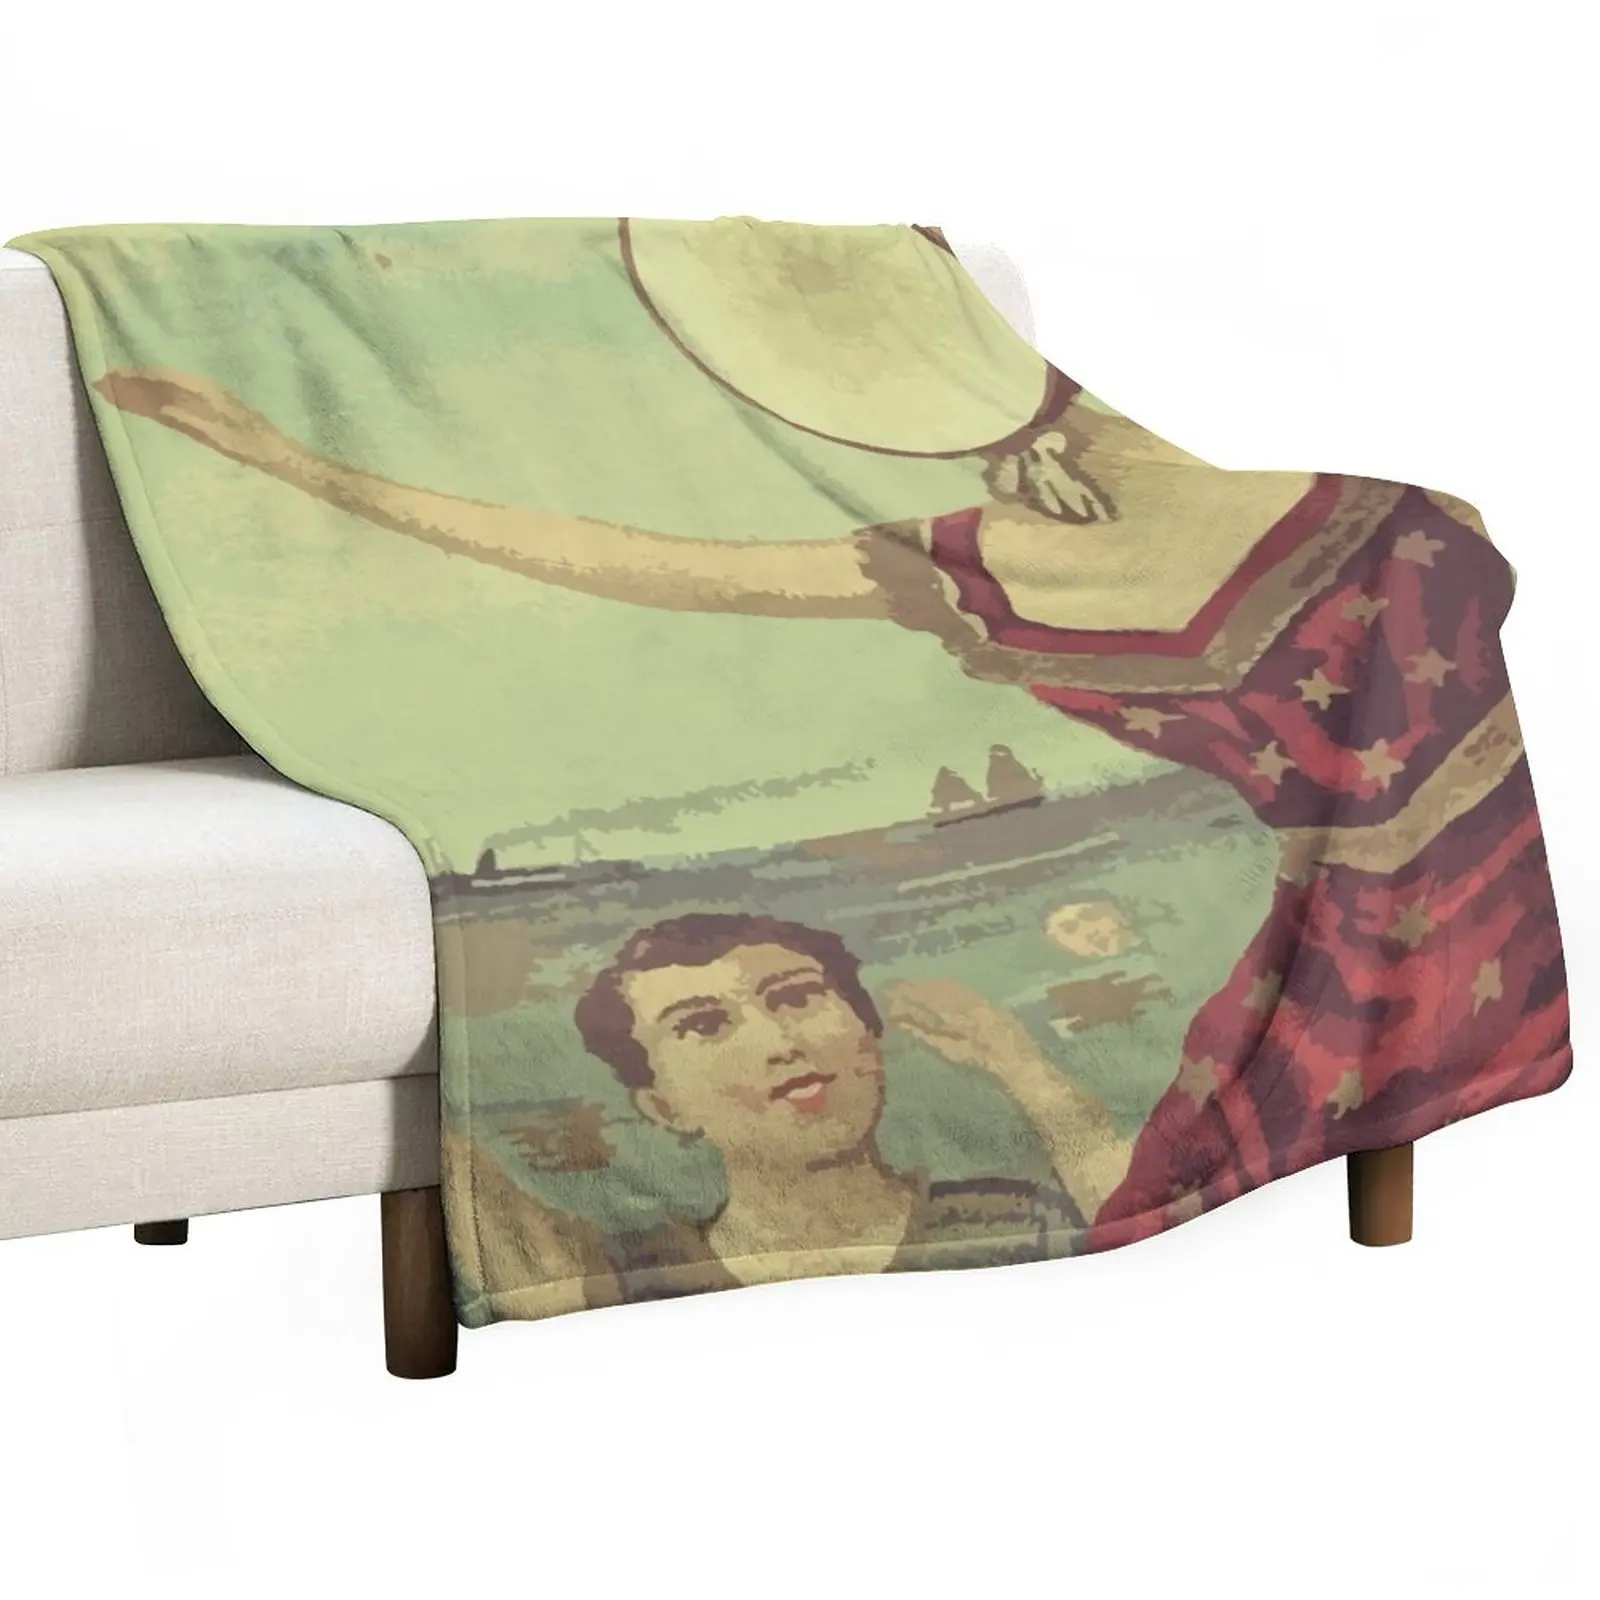 

Neutral Milk Hotel In the Aeroplane Over the Sea Cover Throw Blanket Retros Tourist Blankets